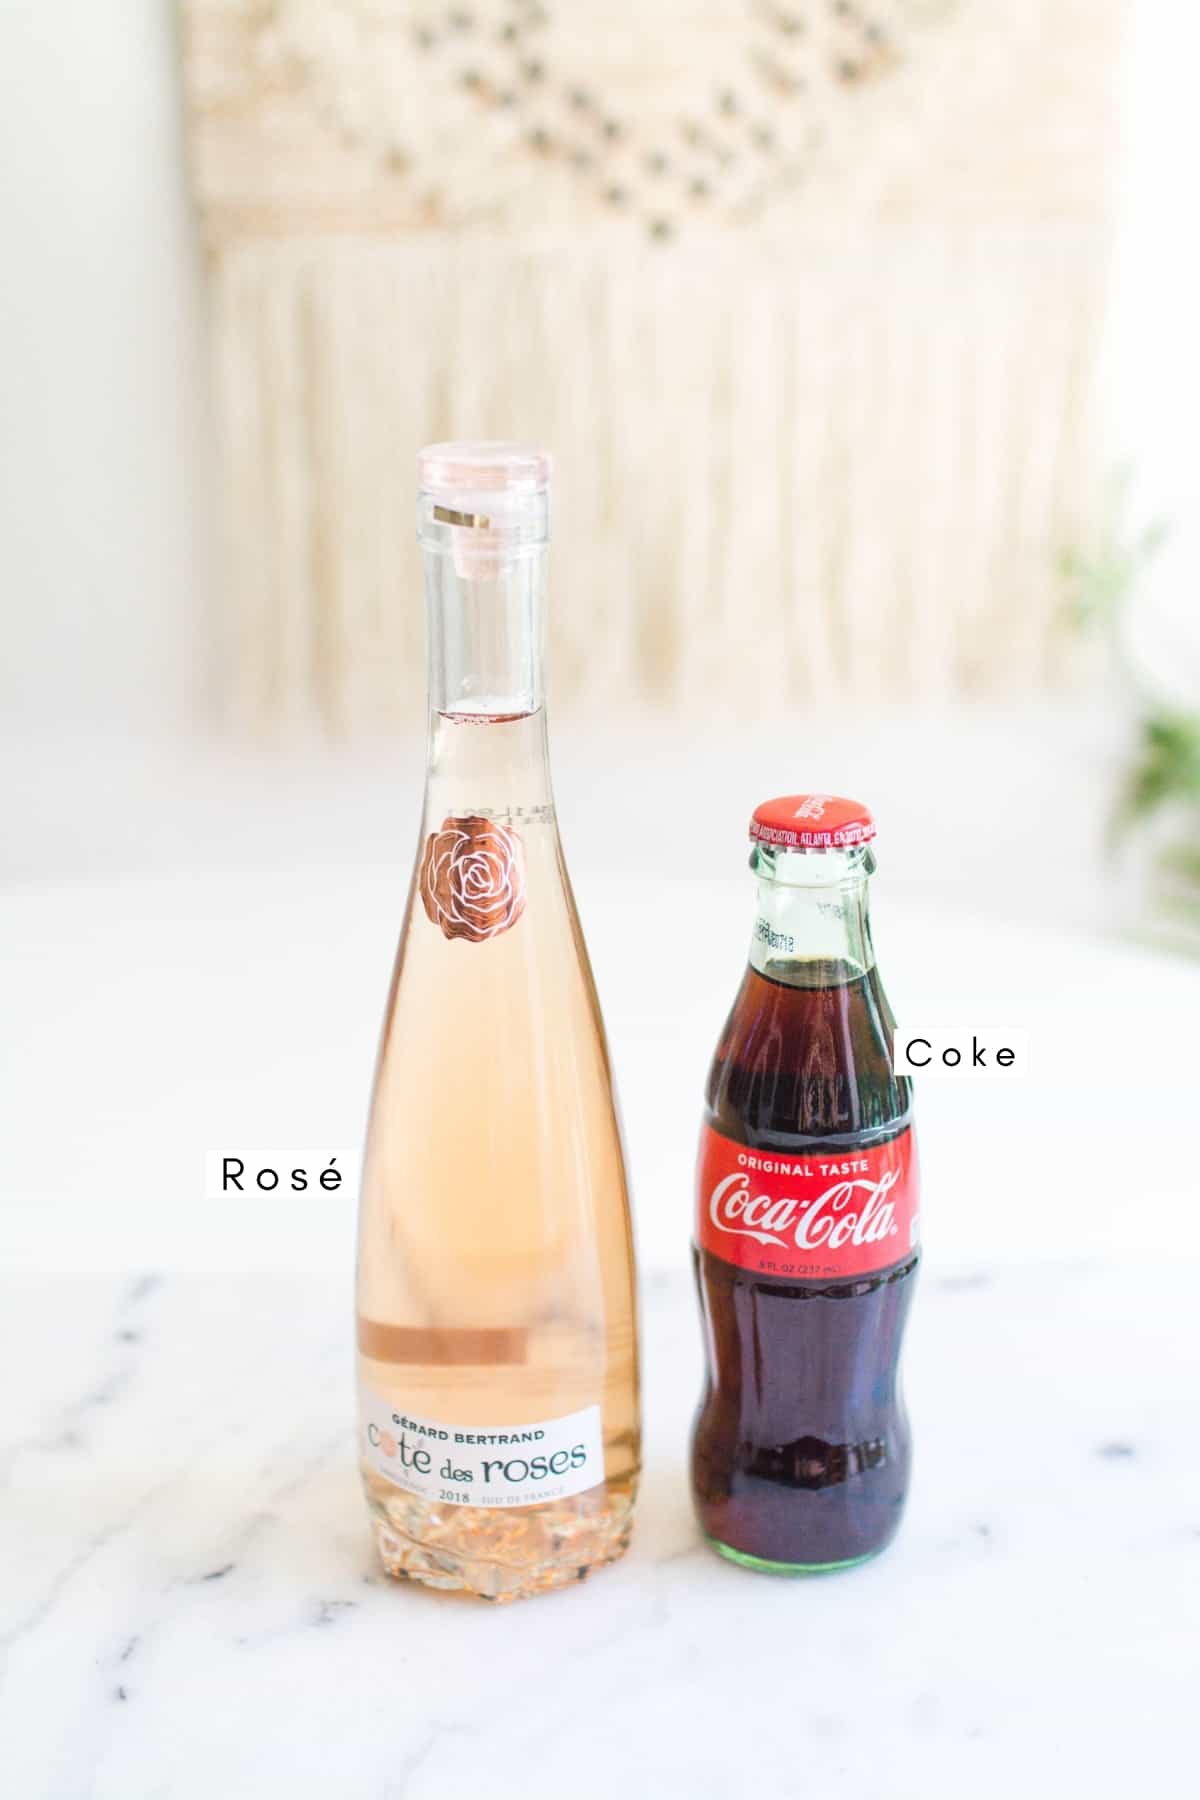 Labeled photo with a small bottle of coke and a mini bottle of rosé.